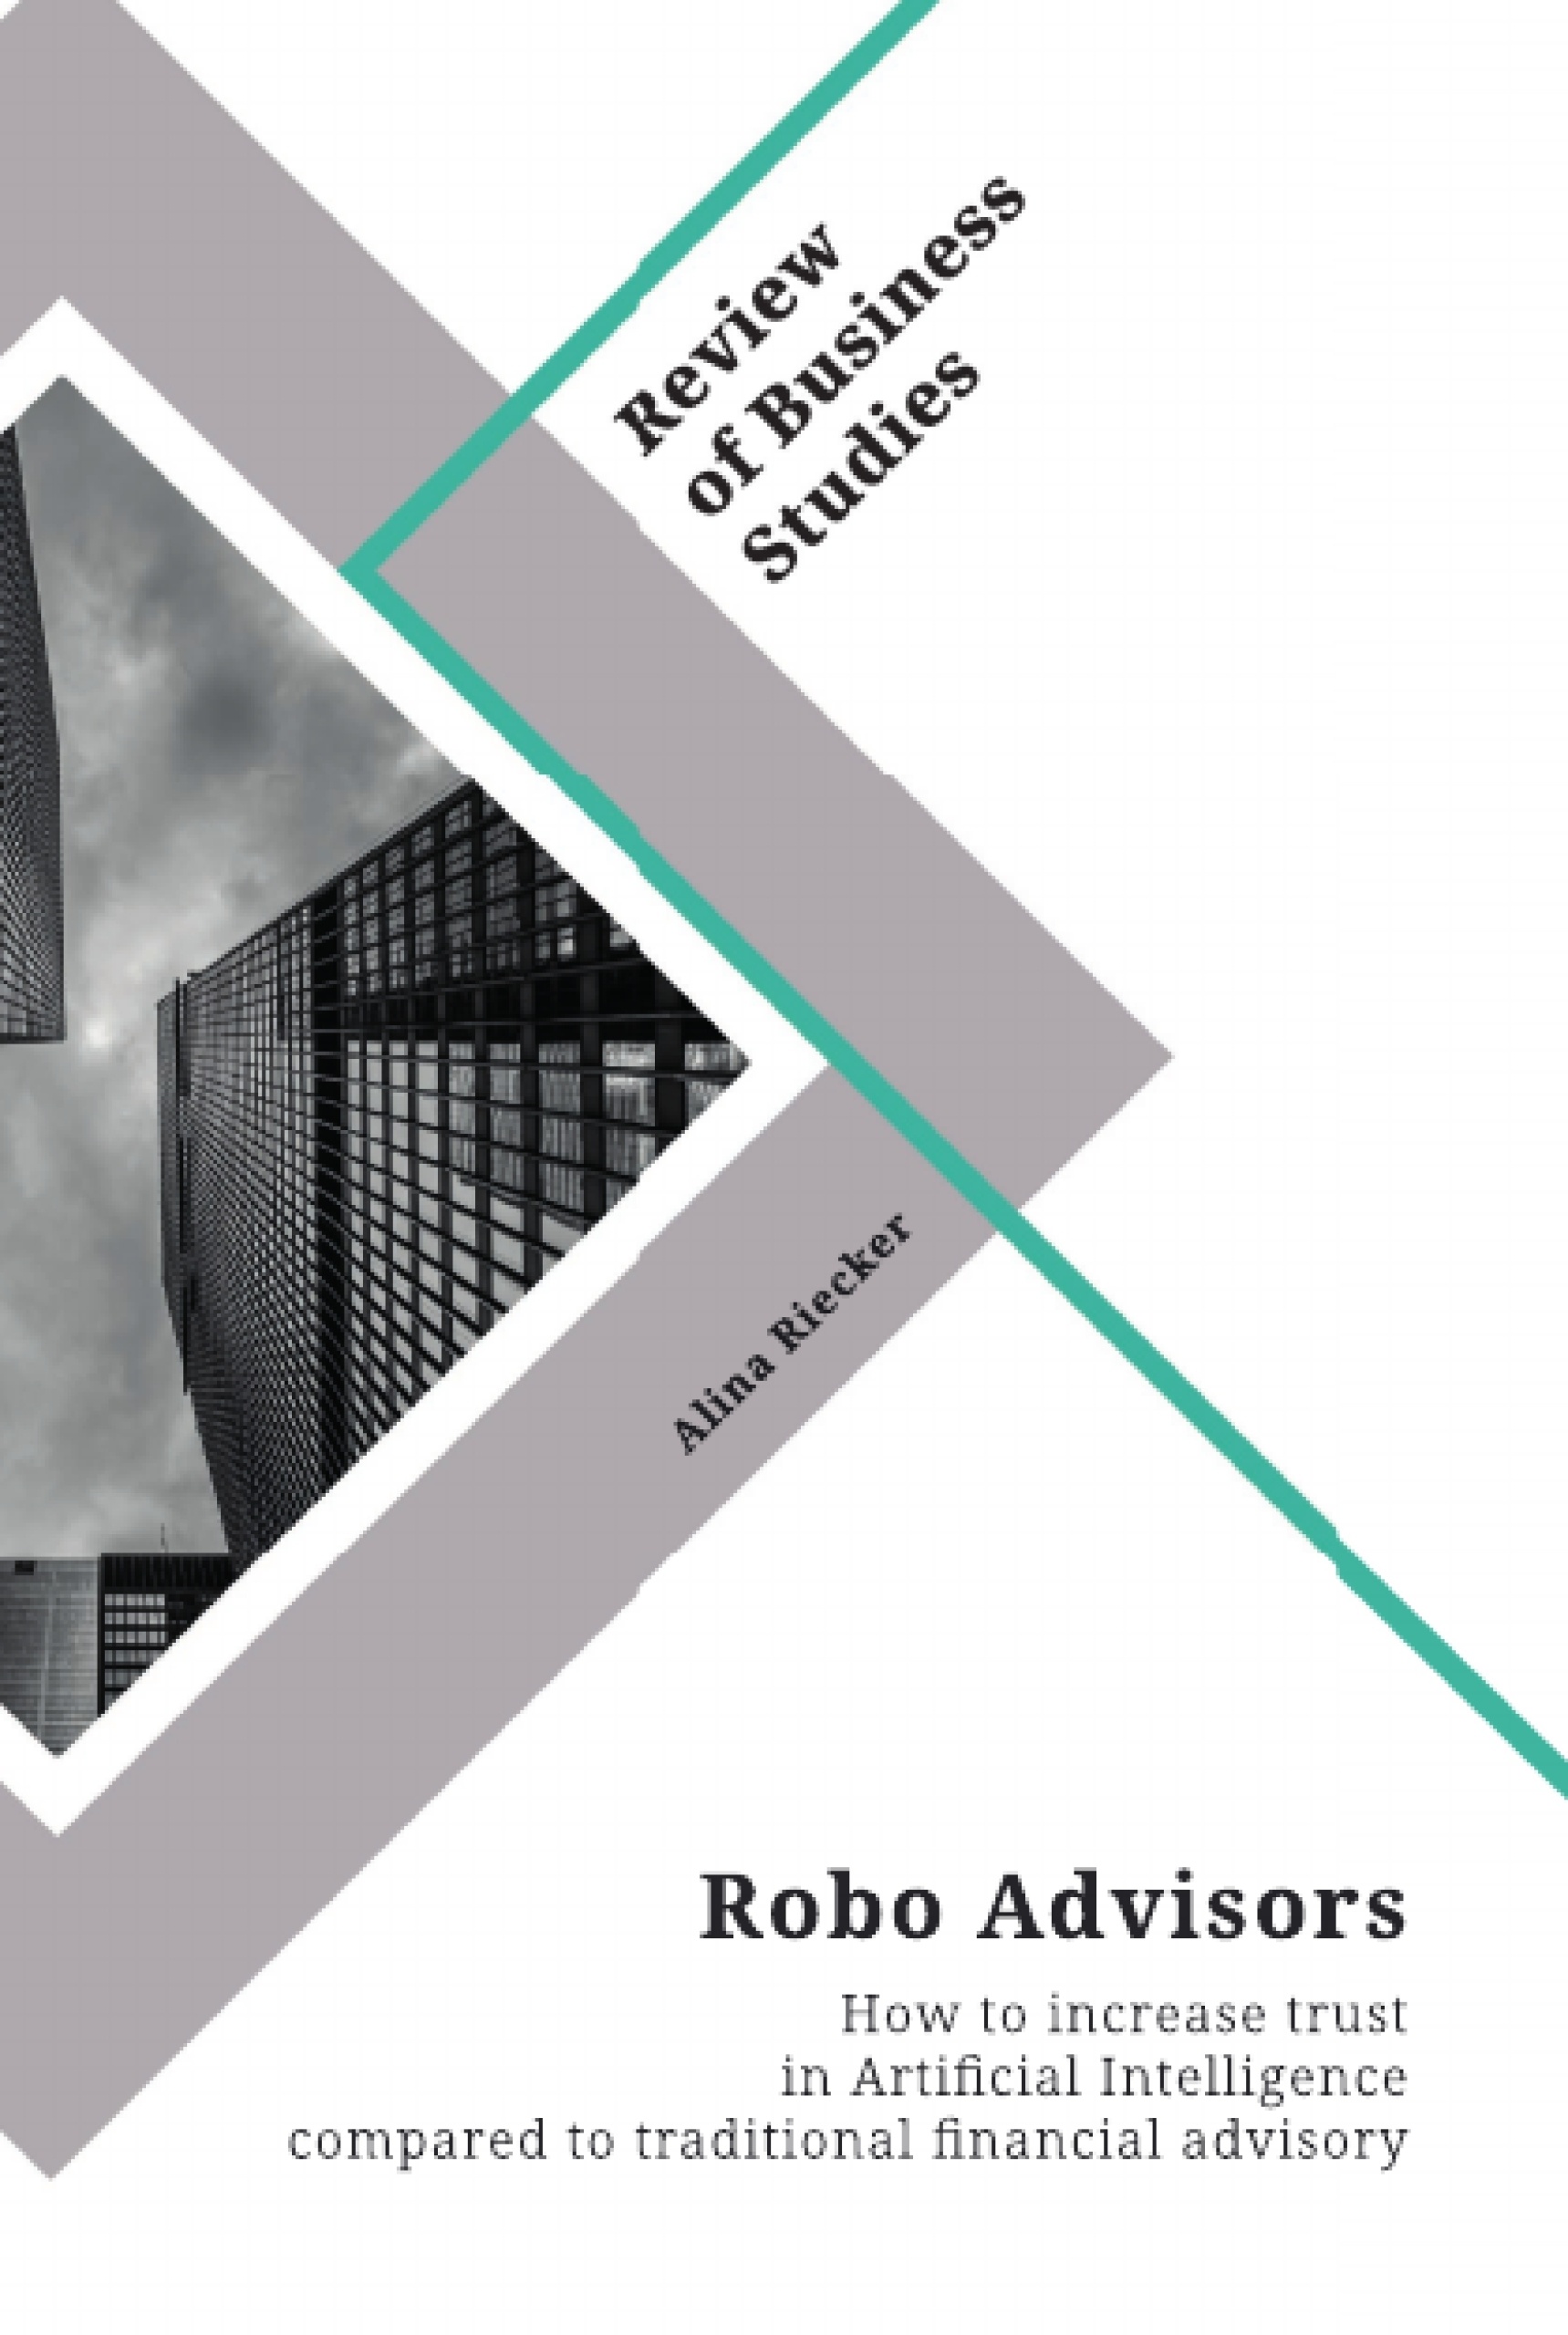 Titre: Robo Advisors. How to increase trust in Artificial Intelligence compared to traditional financial advisory